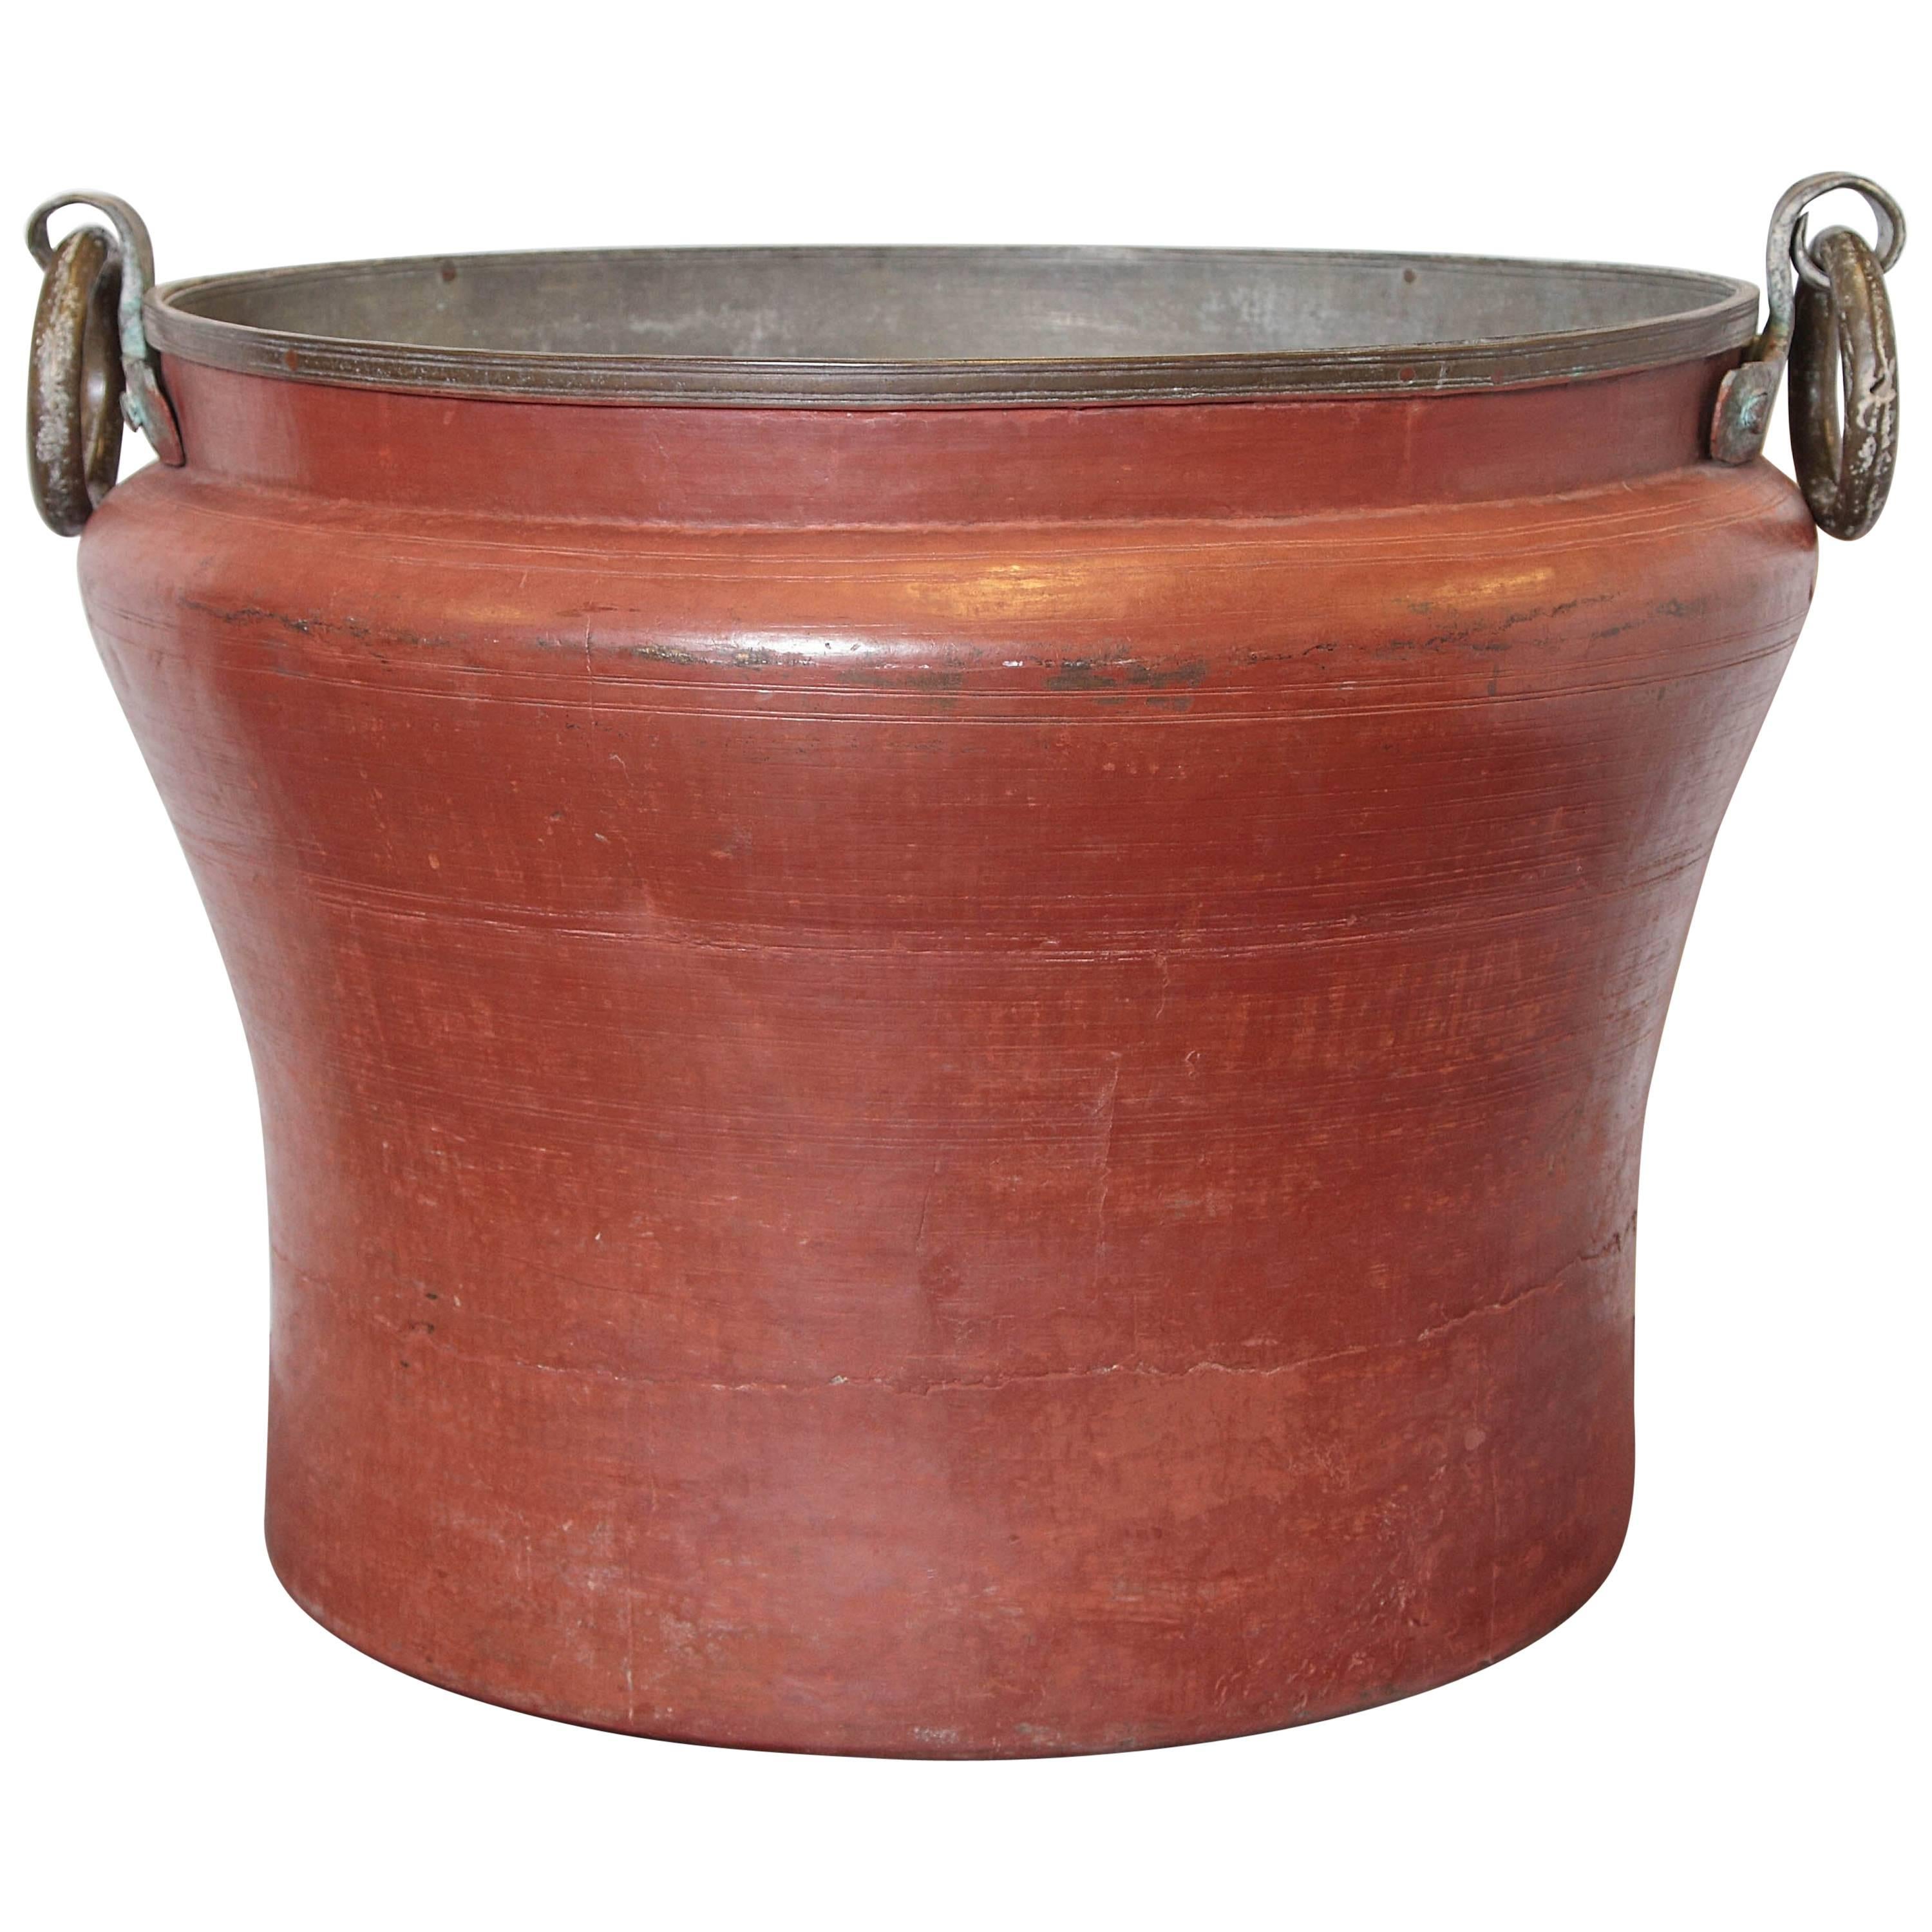 Copper Pot Massive with Forged Metal Handles